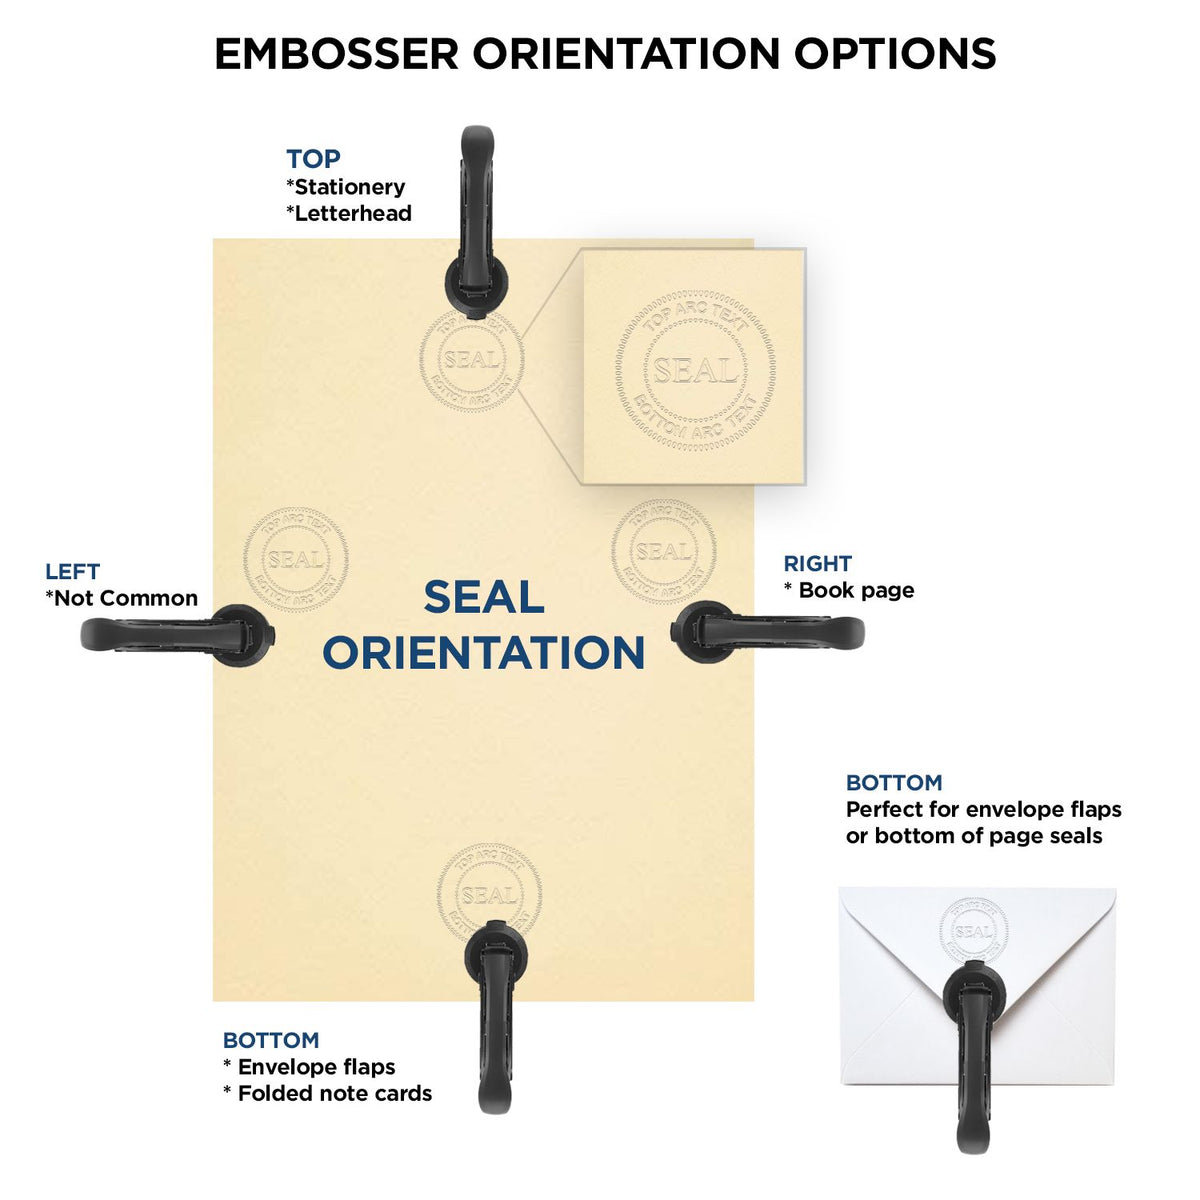 An infographic for the Heavy Duty Cast Iron Georgia Engineer Seal Embosser showing embosser orientation, this is showing examples of a top, bottom, right and left insert.